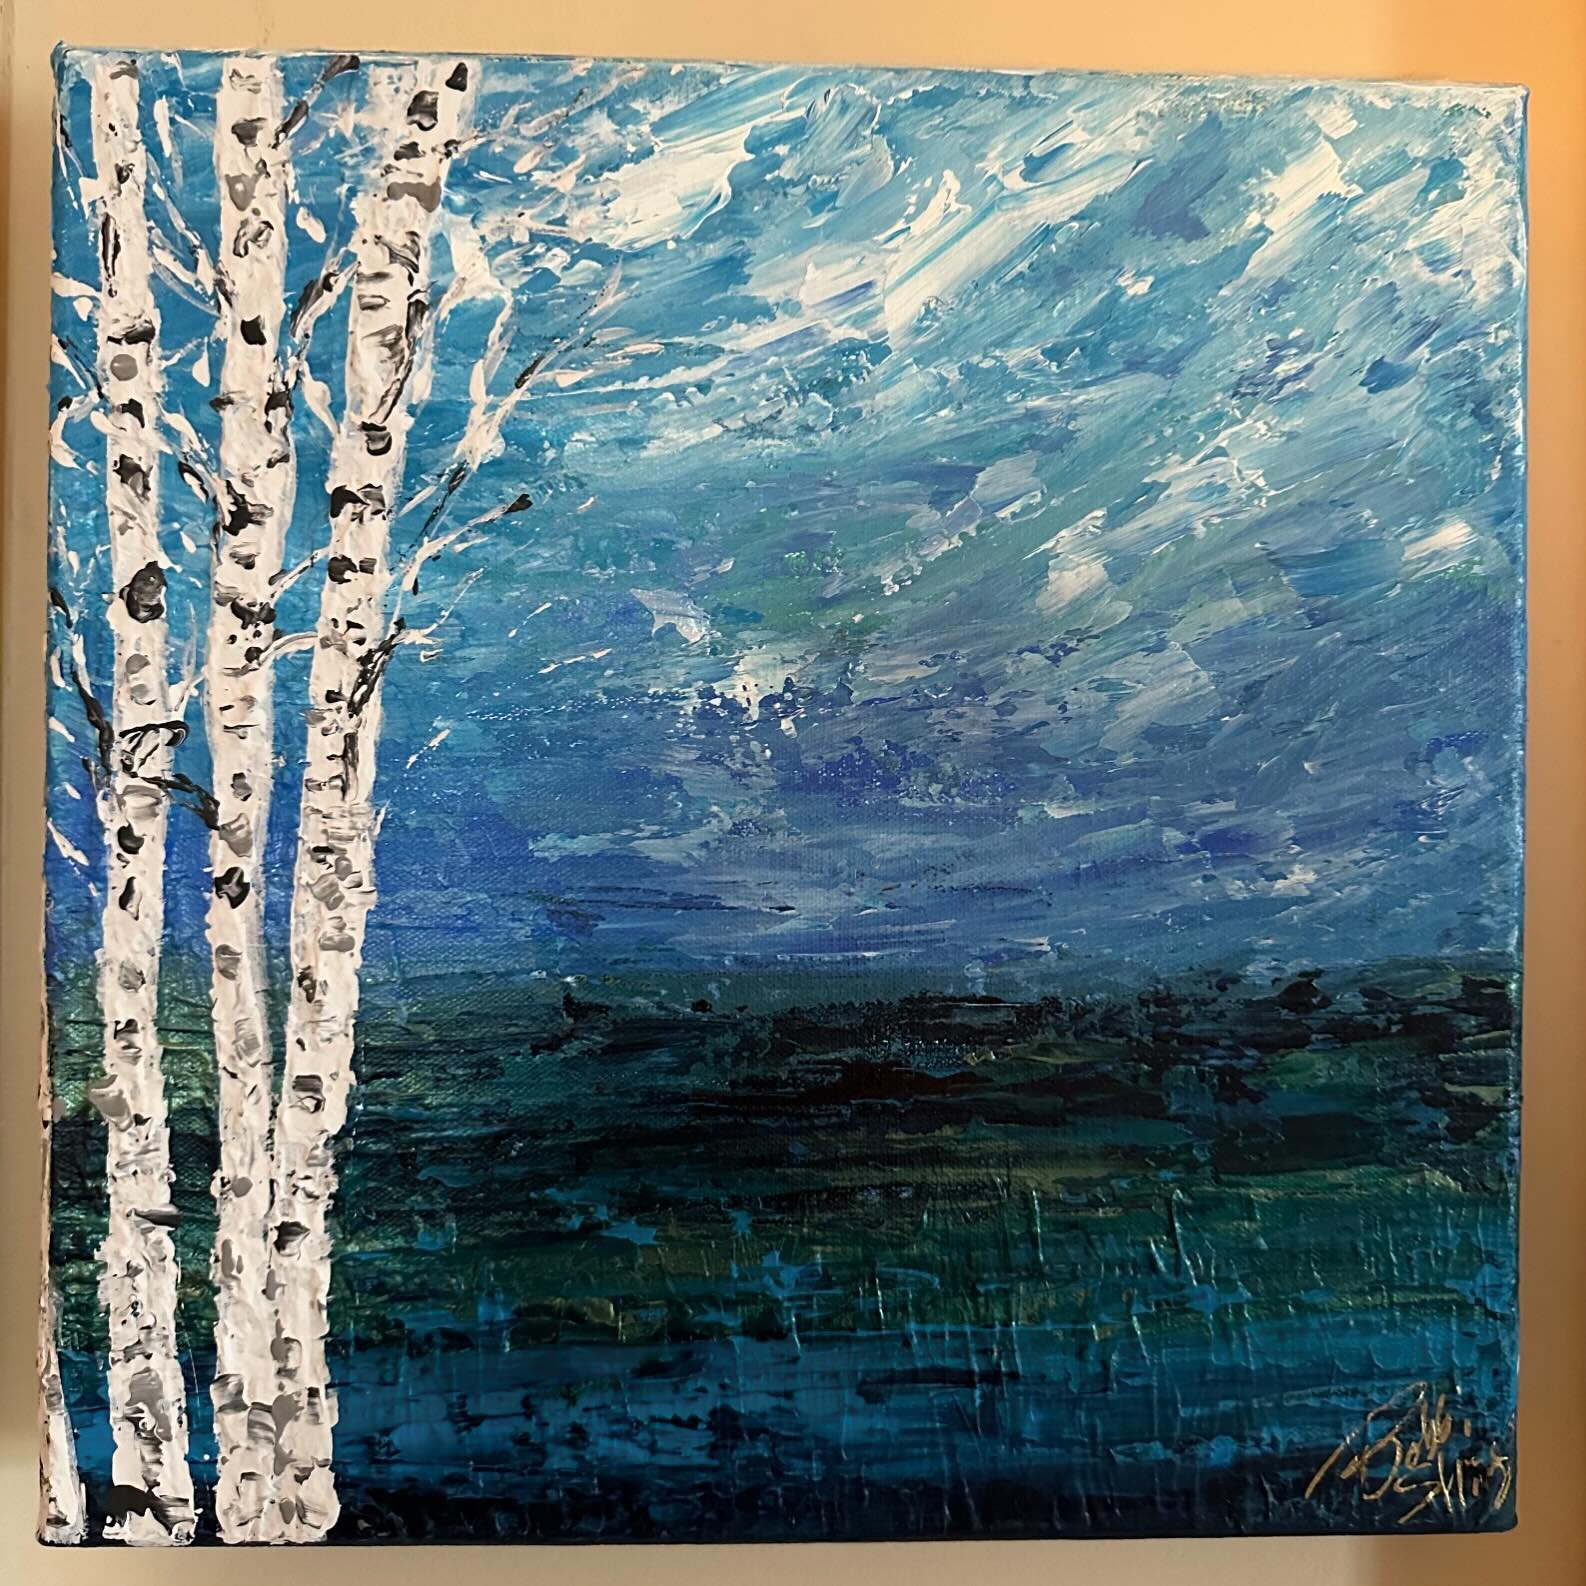 New art for the cabins: &ldquo;Superior Views&rdquo; pallet knife painting by Bobbi Shirey. manninenscabins.com #bobbishirey #bobbishirey_artist #supportlocalartists #upperpeninsulaartist #otterlakelife #manninenscabins